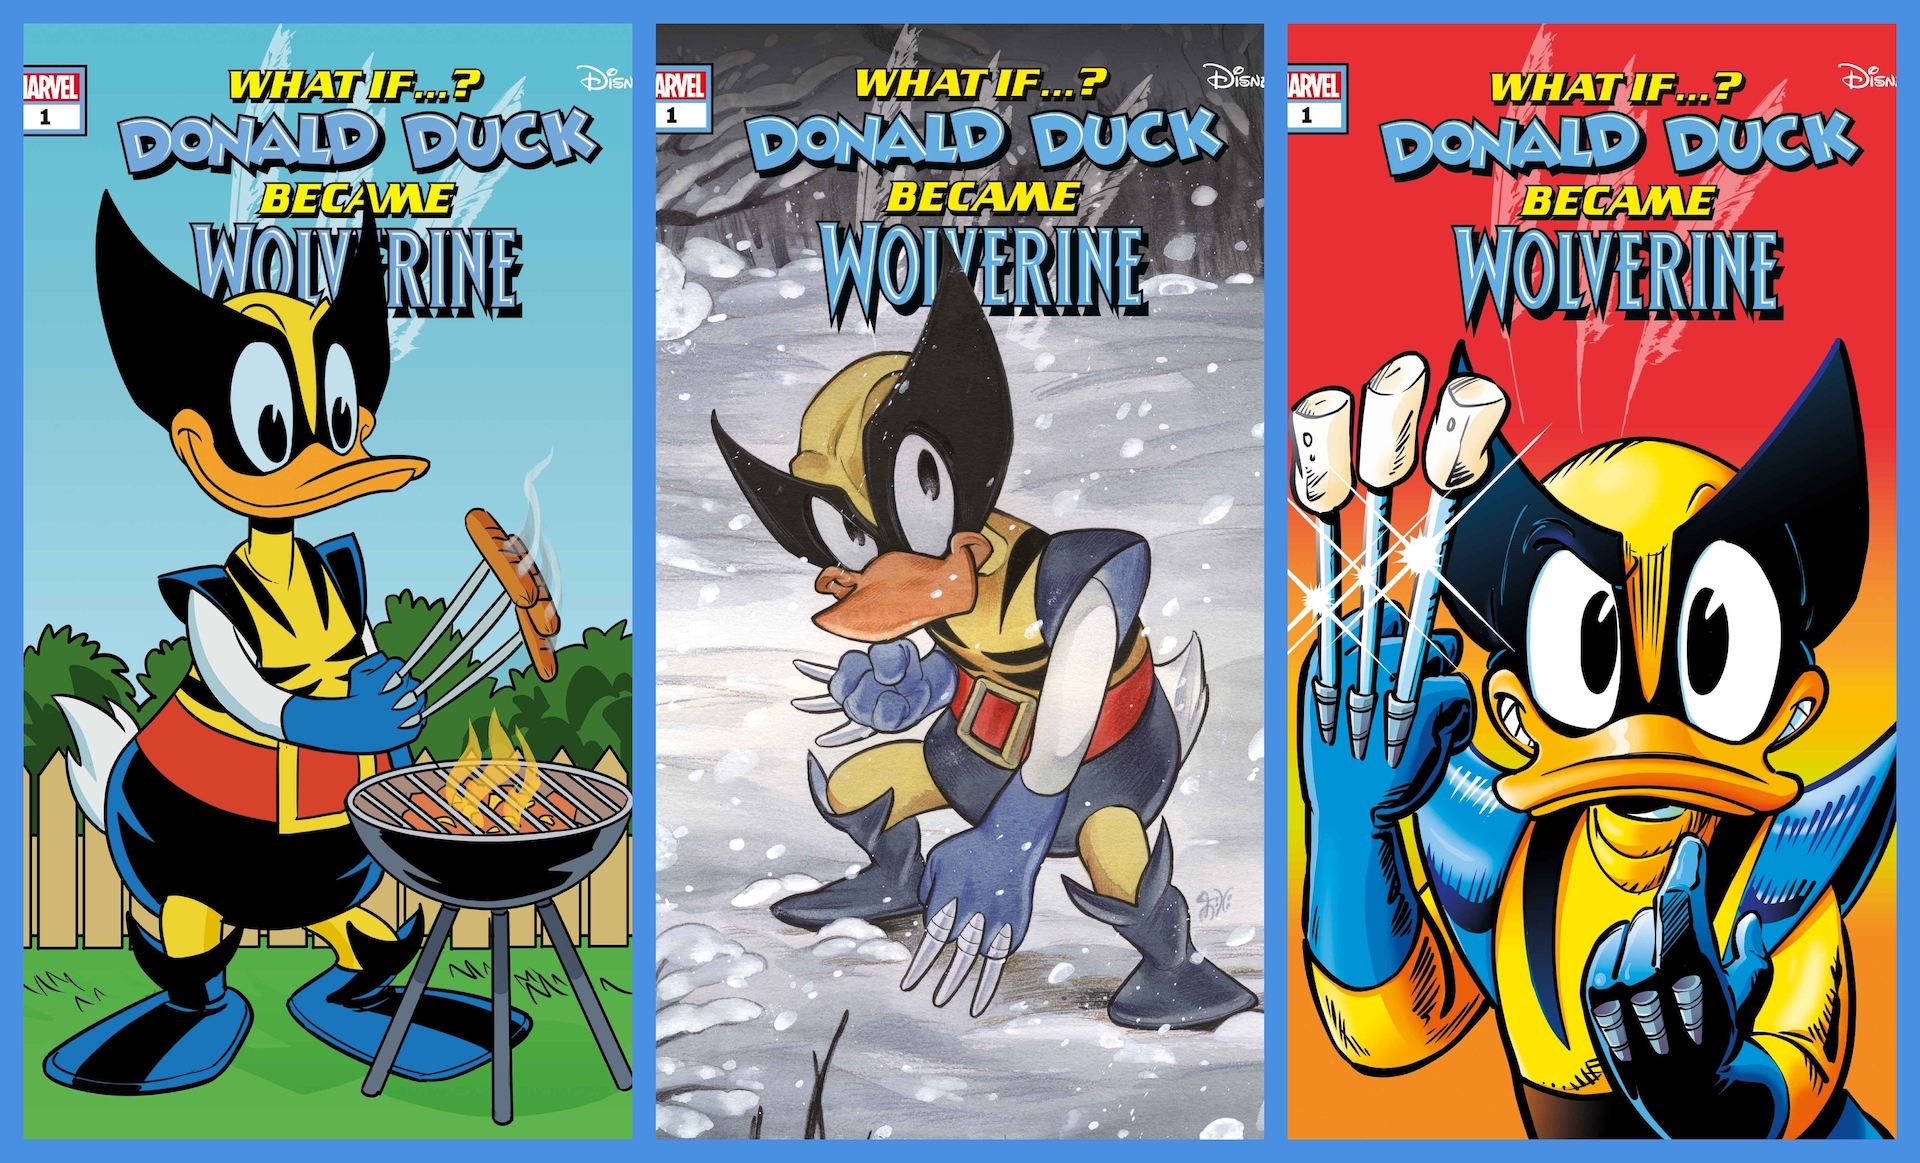 'Marvel & Disney: What If...? Donald Duck Became Wolverine' #1 one-shot announced